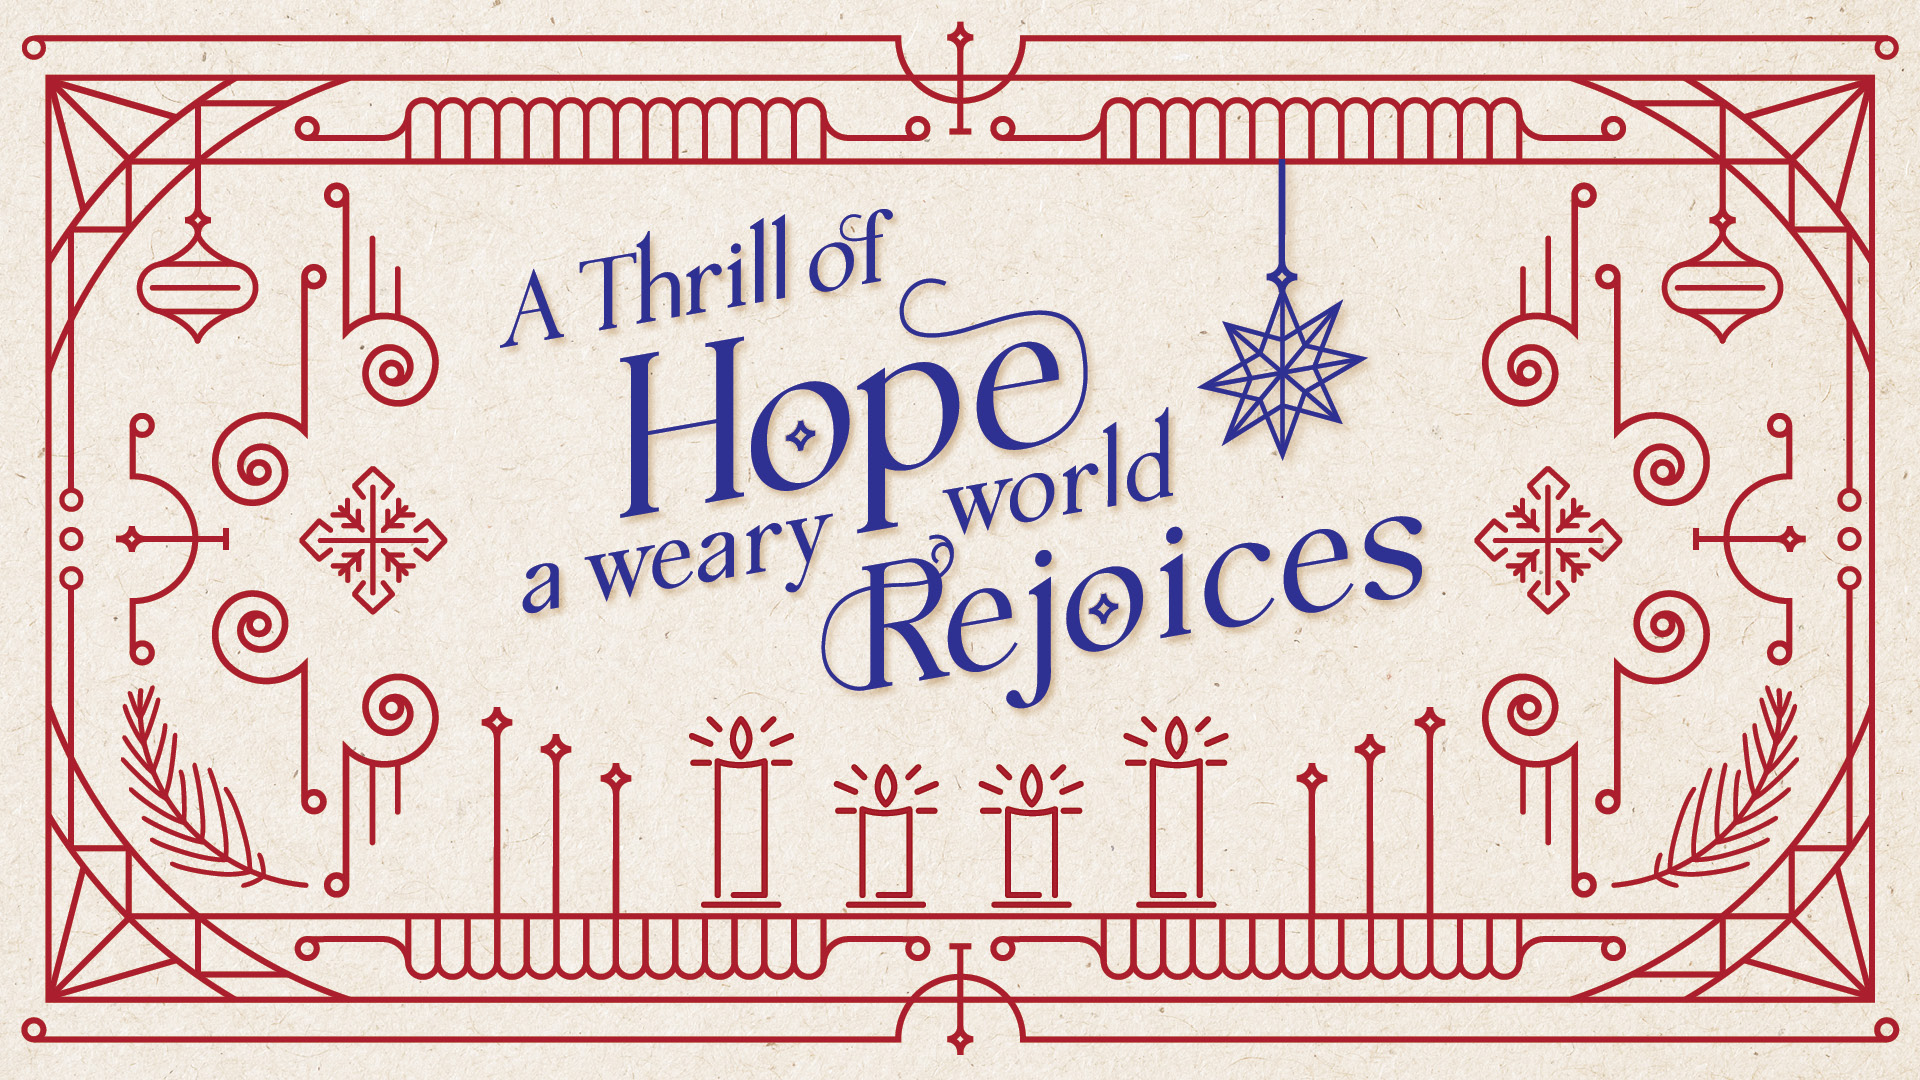 A Thrill of Hope: A Weary World Rejoices